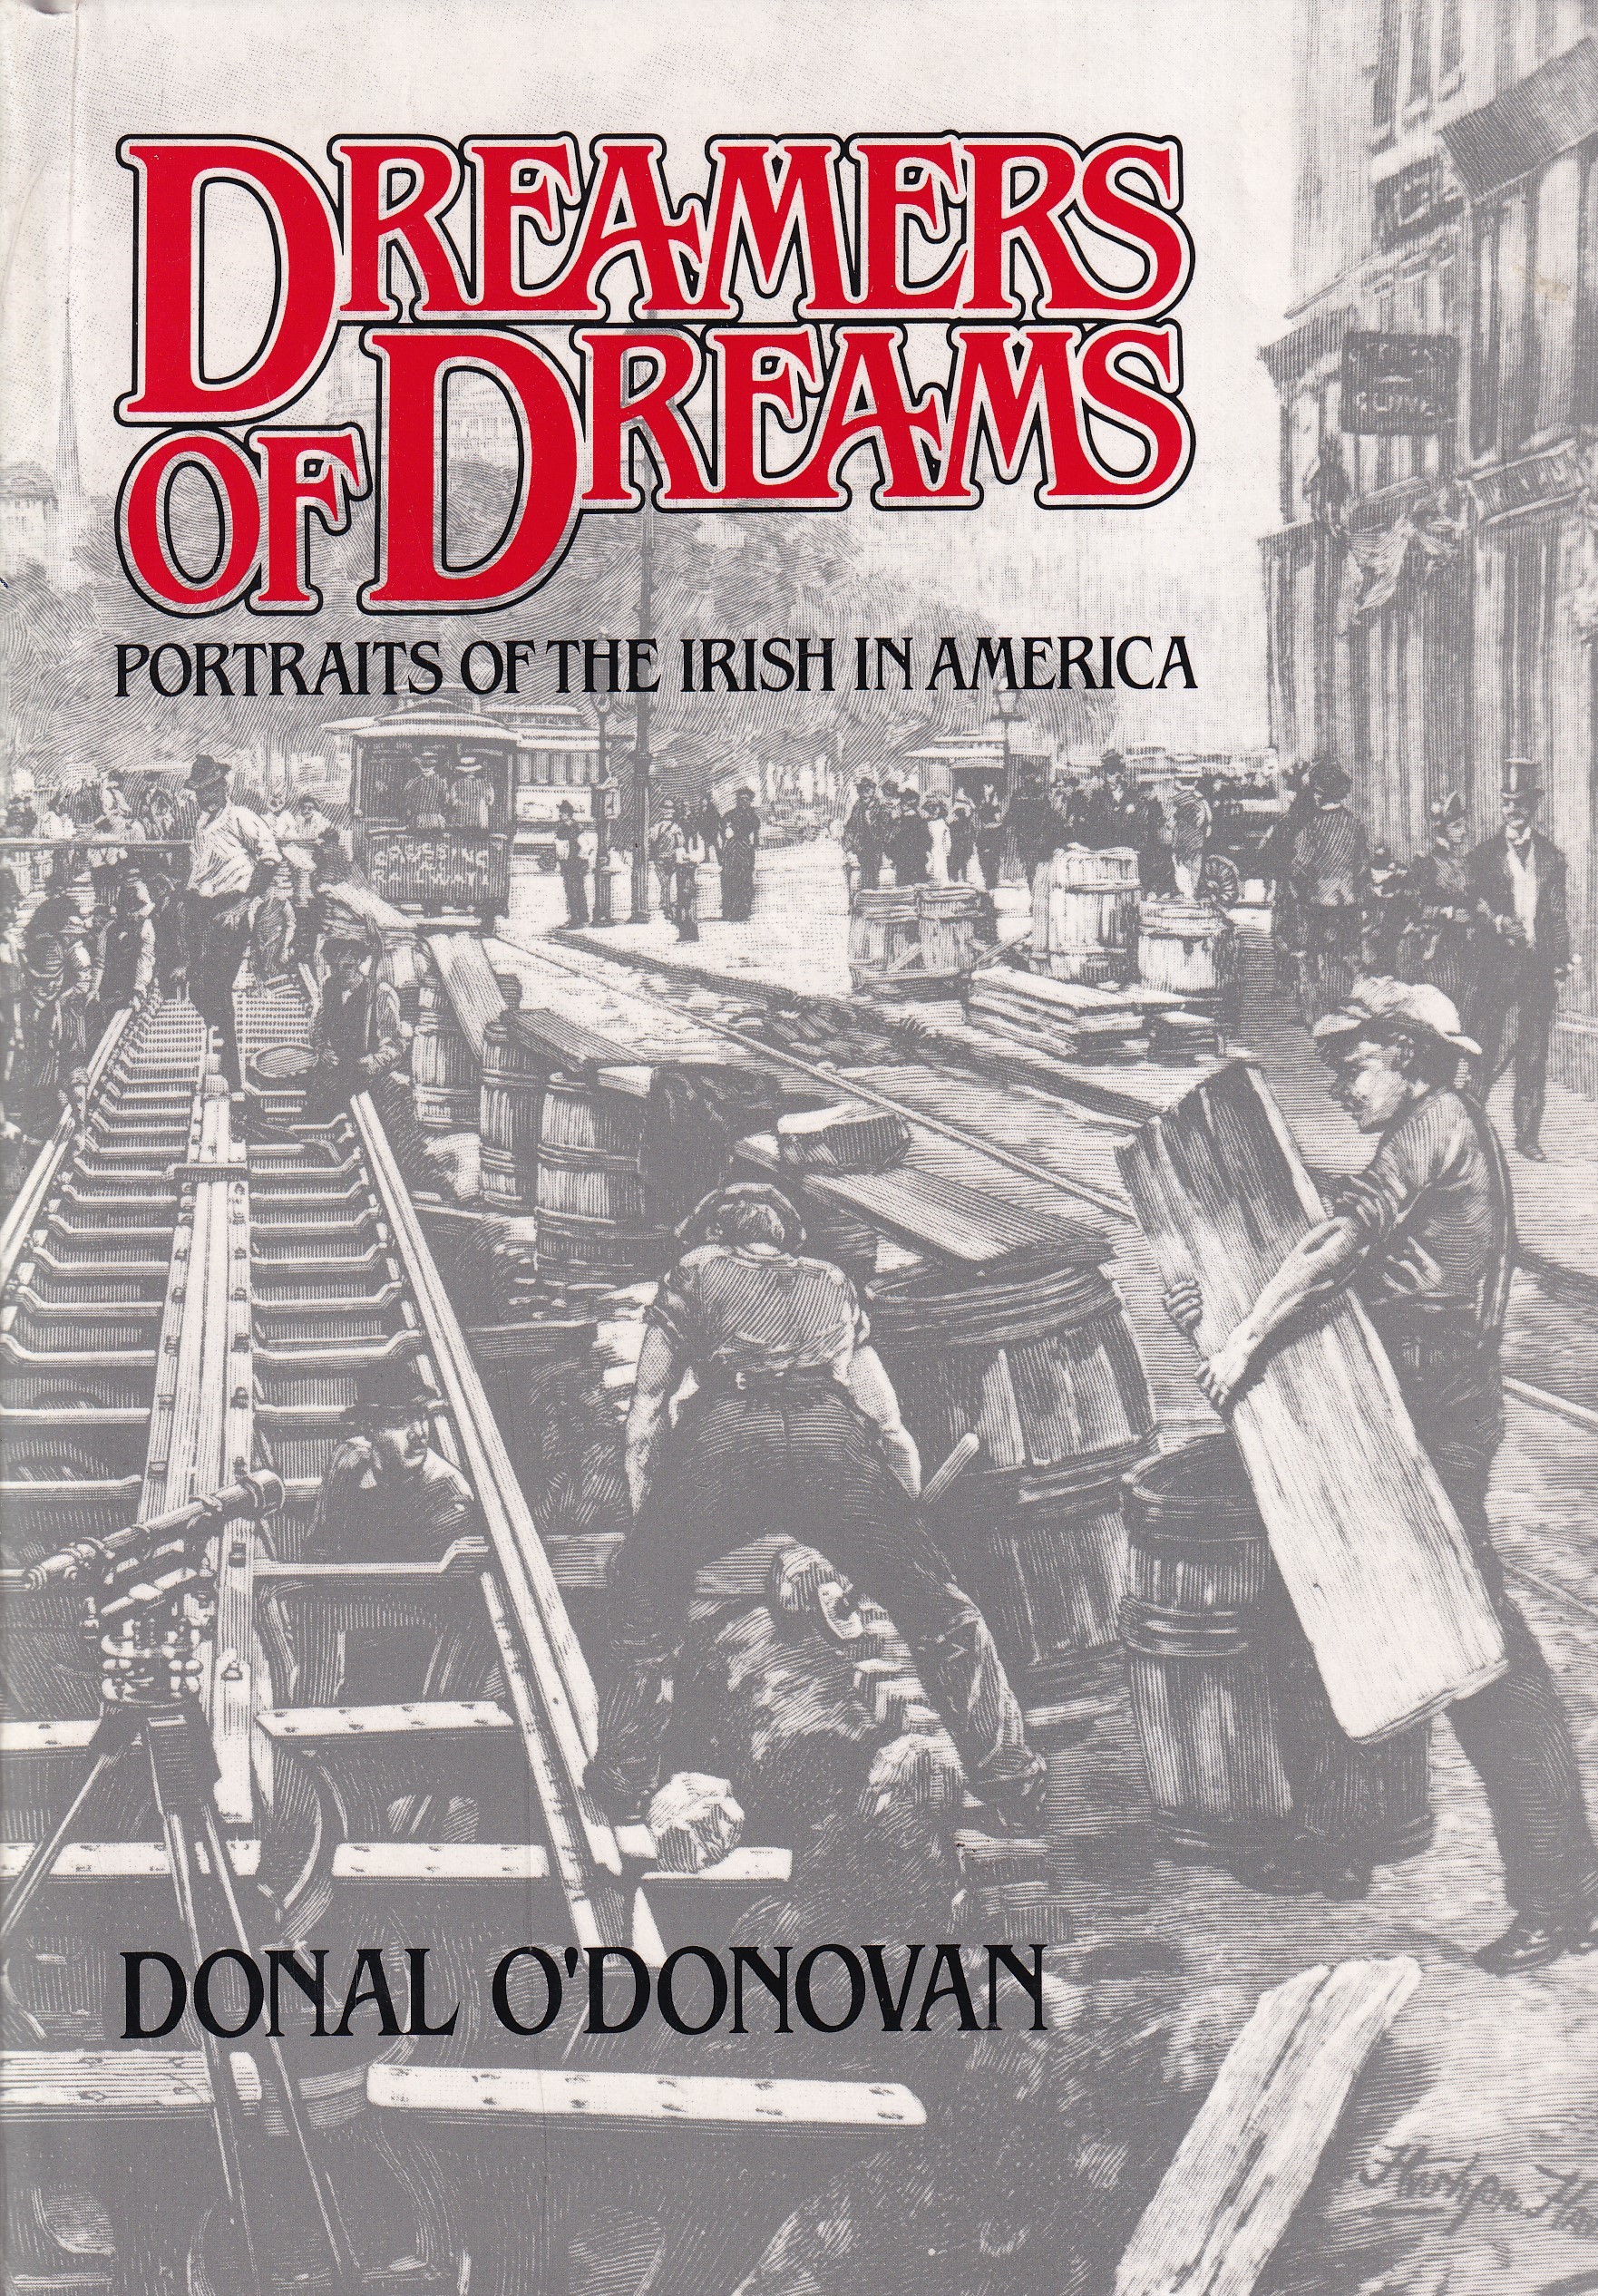 Dreamers of Dreams: Portraits of the Irish in America by Donal O'Donovan